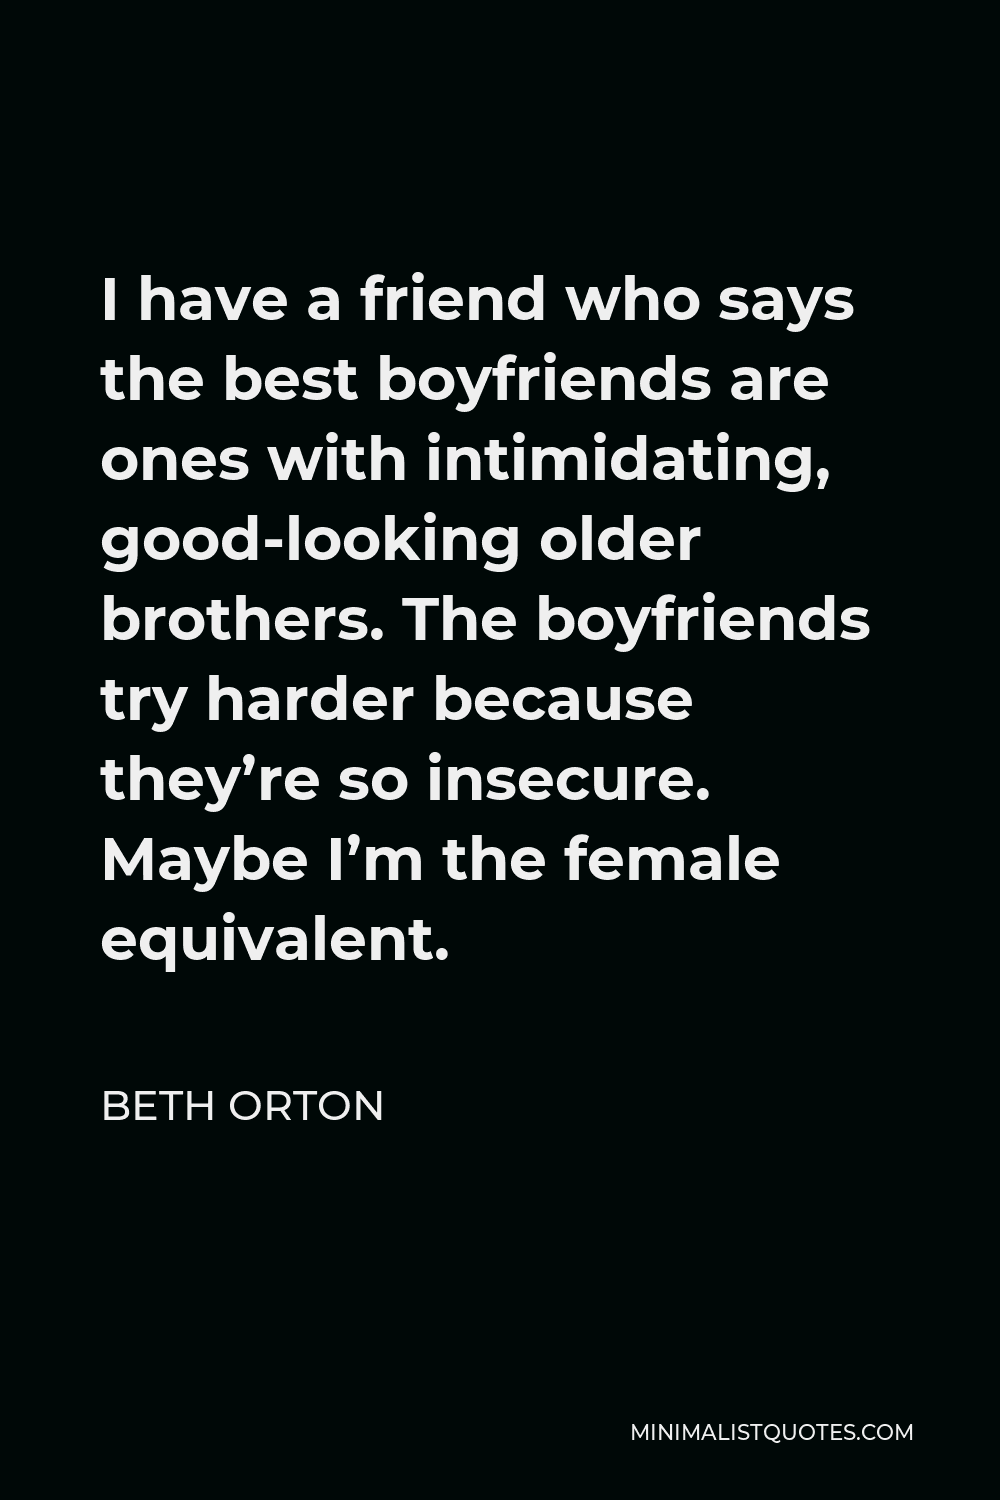 Beth Orton Quote - I have a friend who says the best boyfriends are ones with intimidating, good-looking older brothers. The boyfriends try harder because they’re so insecure. Maybe I’m the female equivalent.